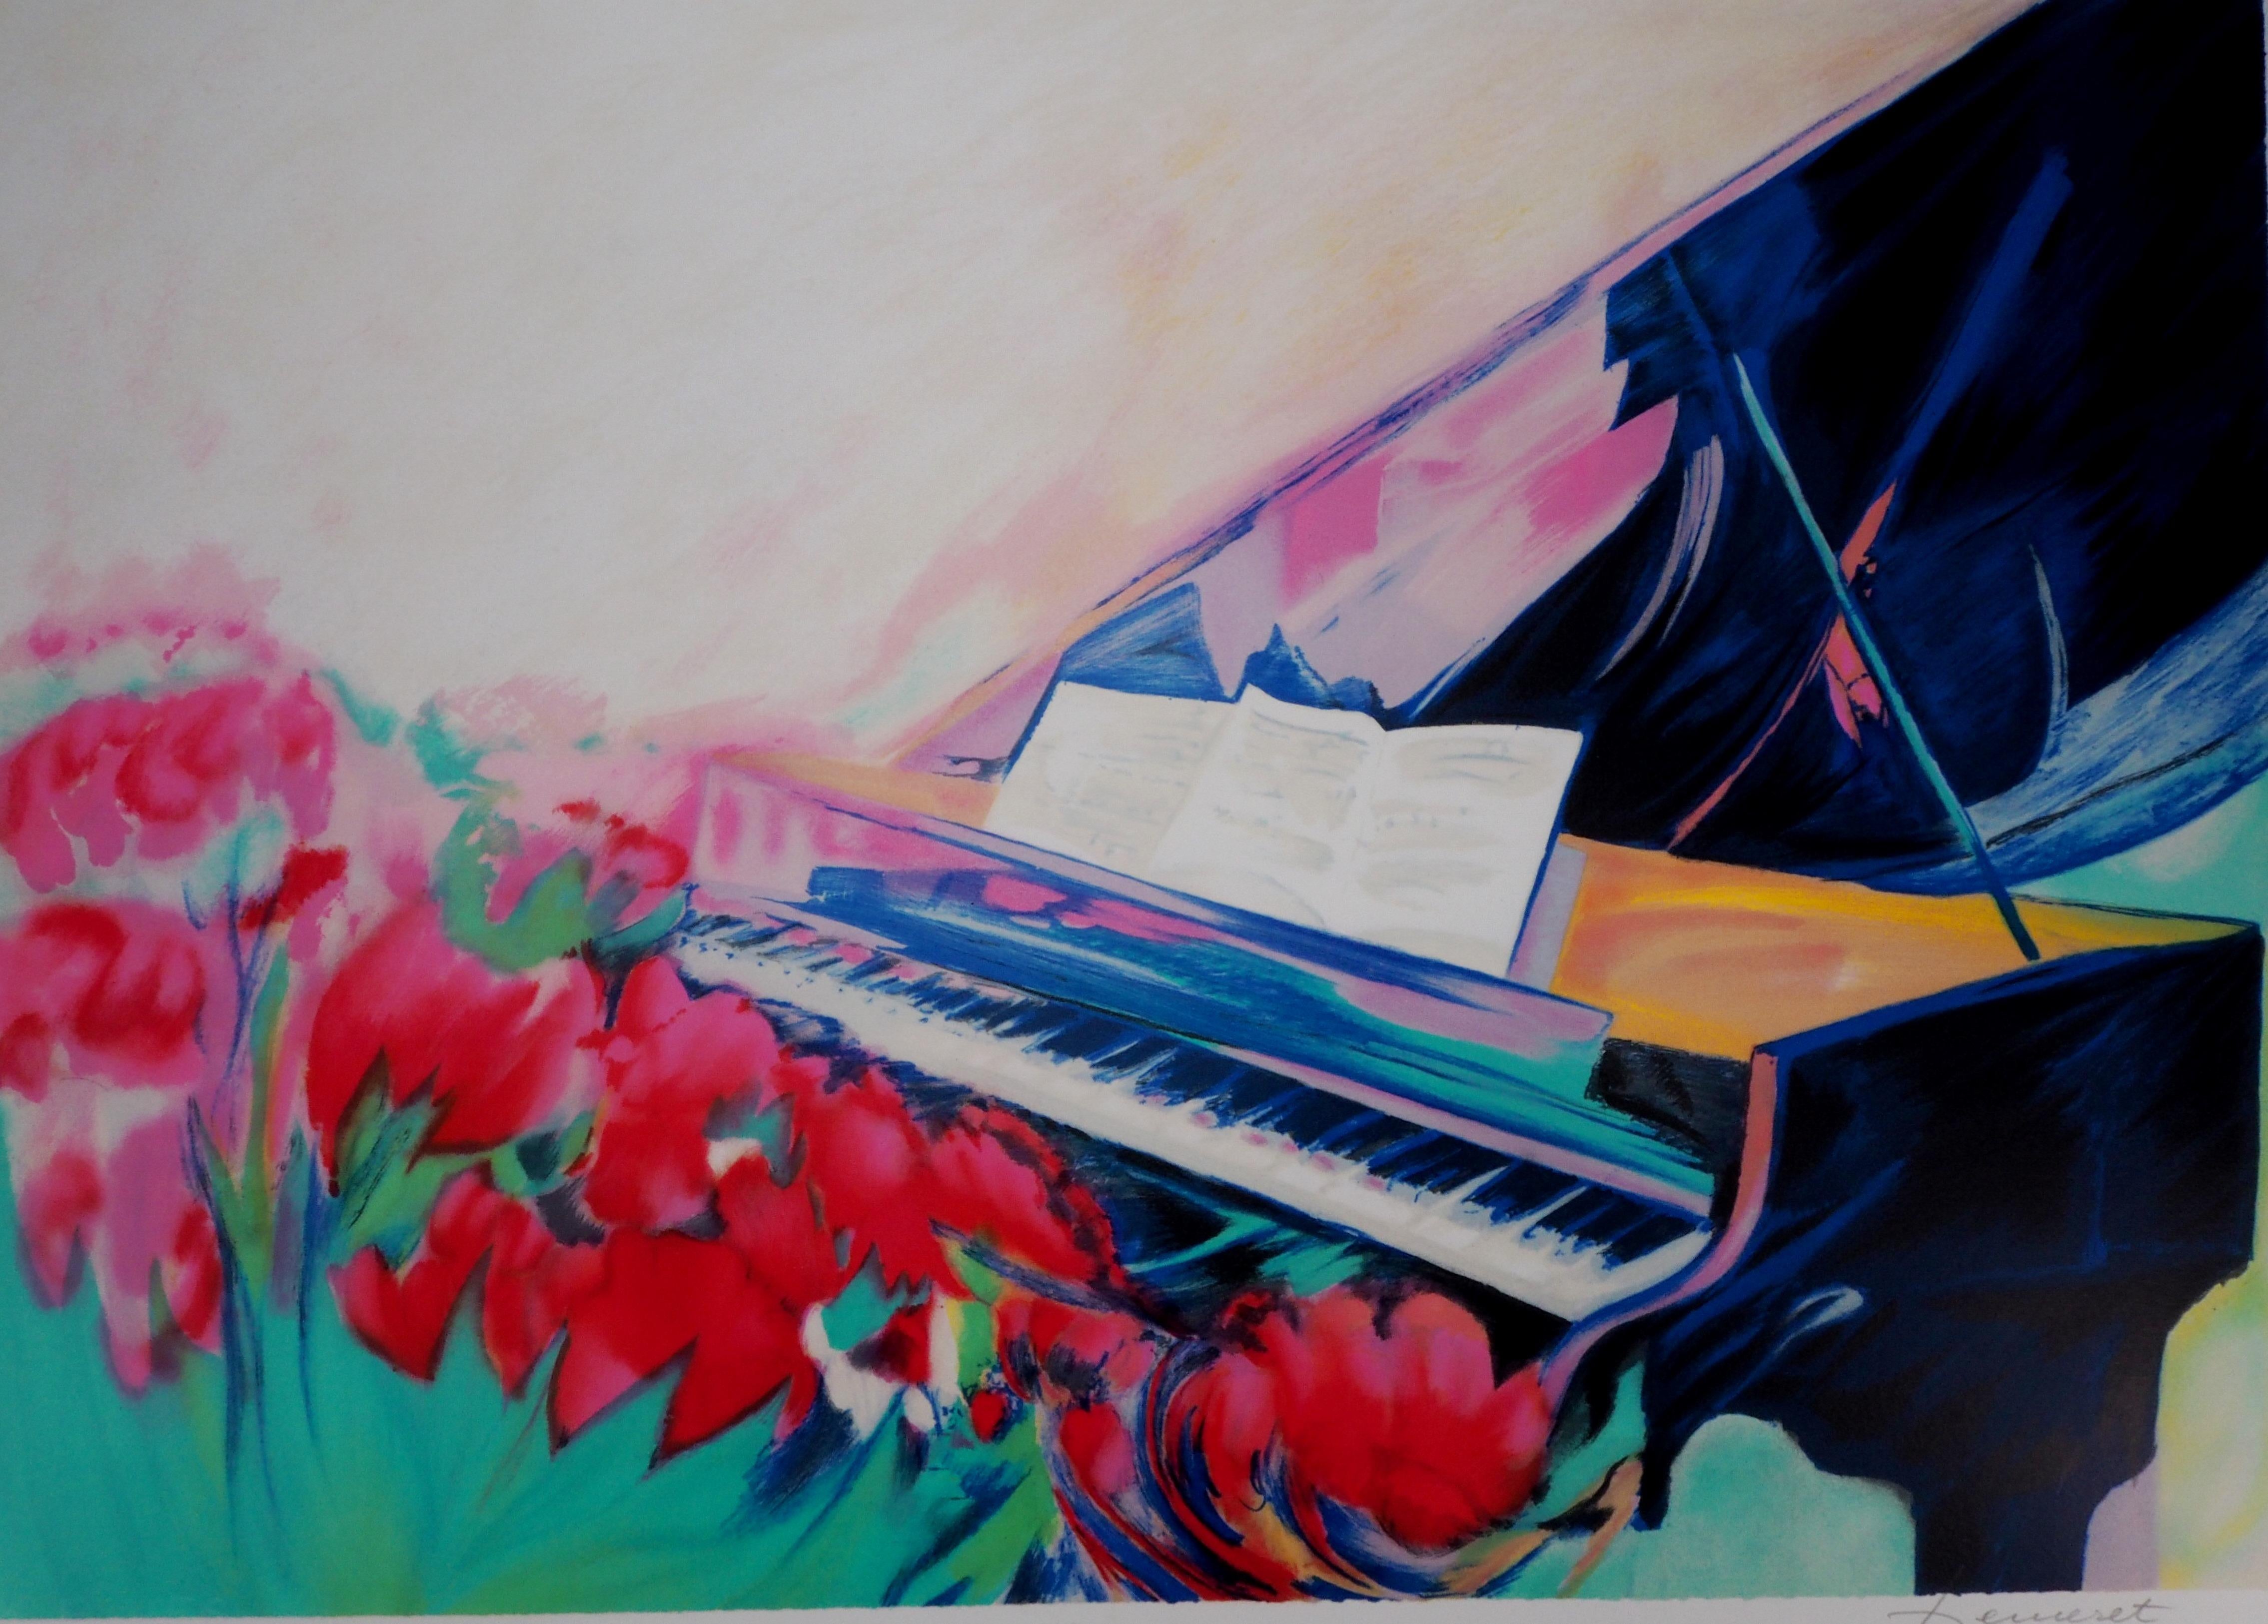 Piano and Music Sheet -  Original Lithograph, Handsigned  - Modern Print by Claude Hemeret